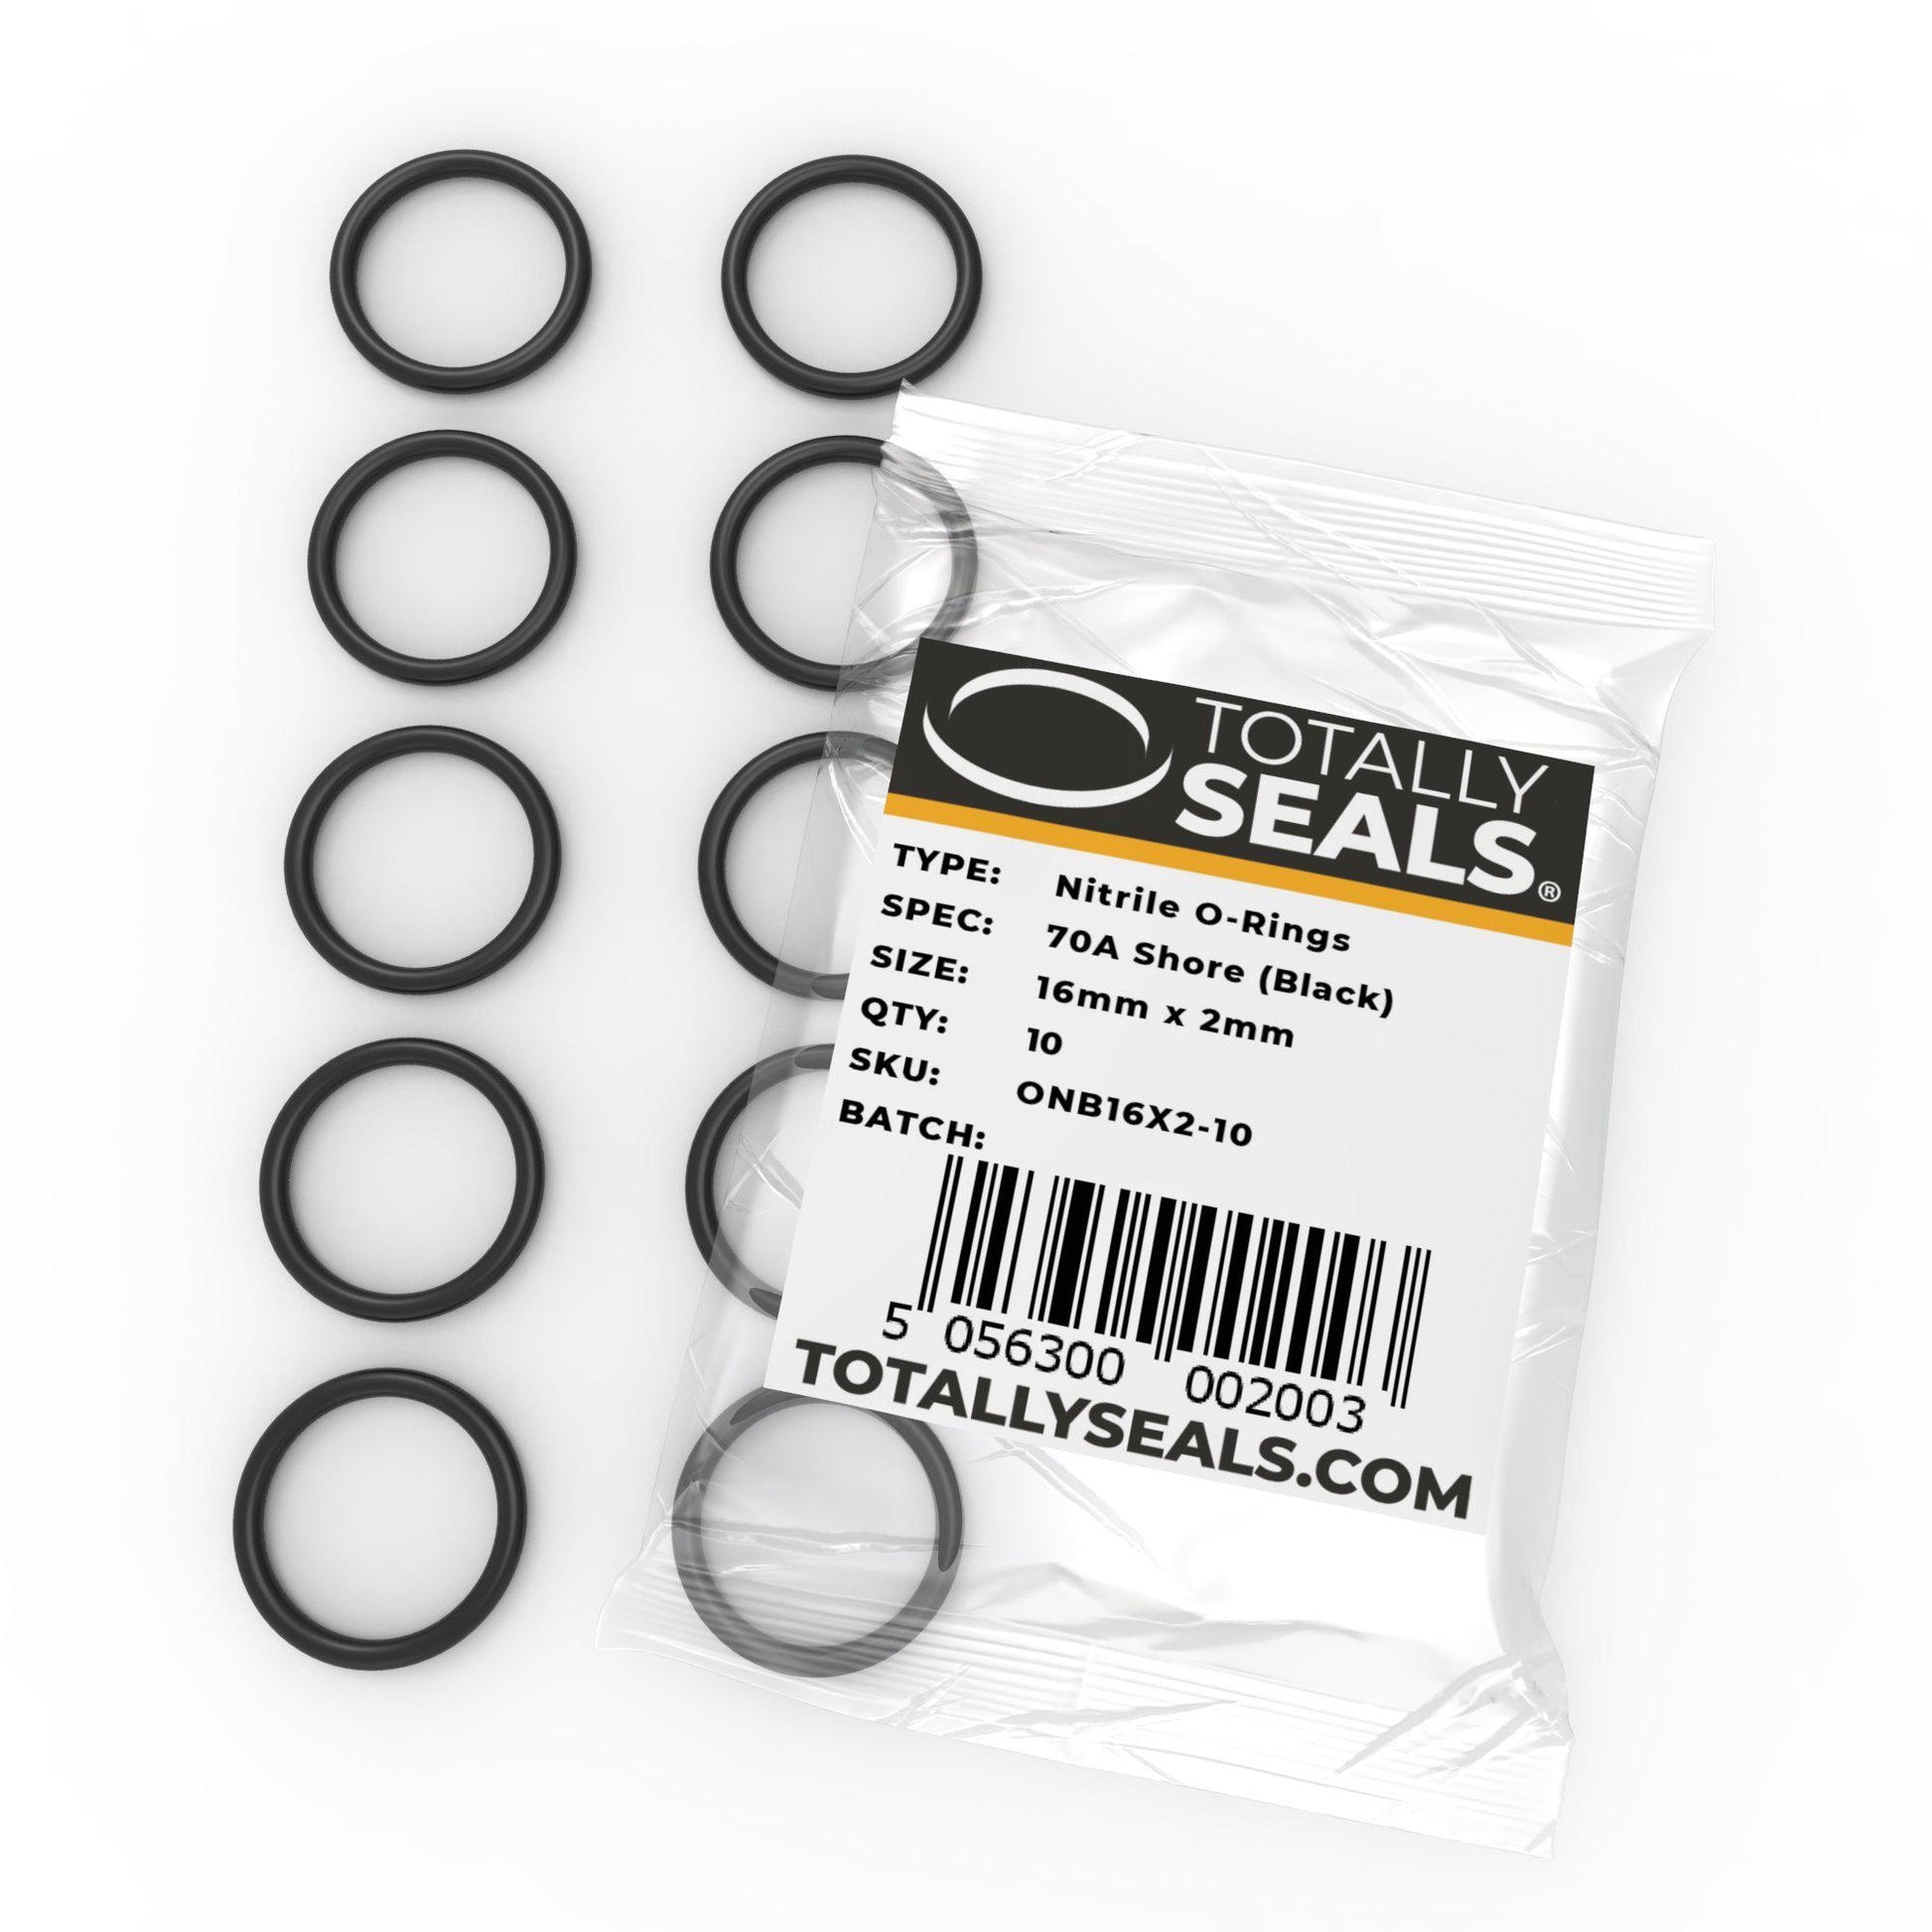 16mm x 2mm (20mm OD) Nitrile O-Rings - Totally Seals®